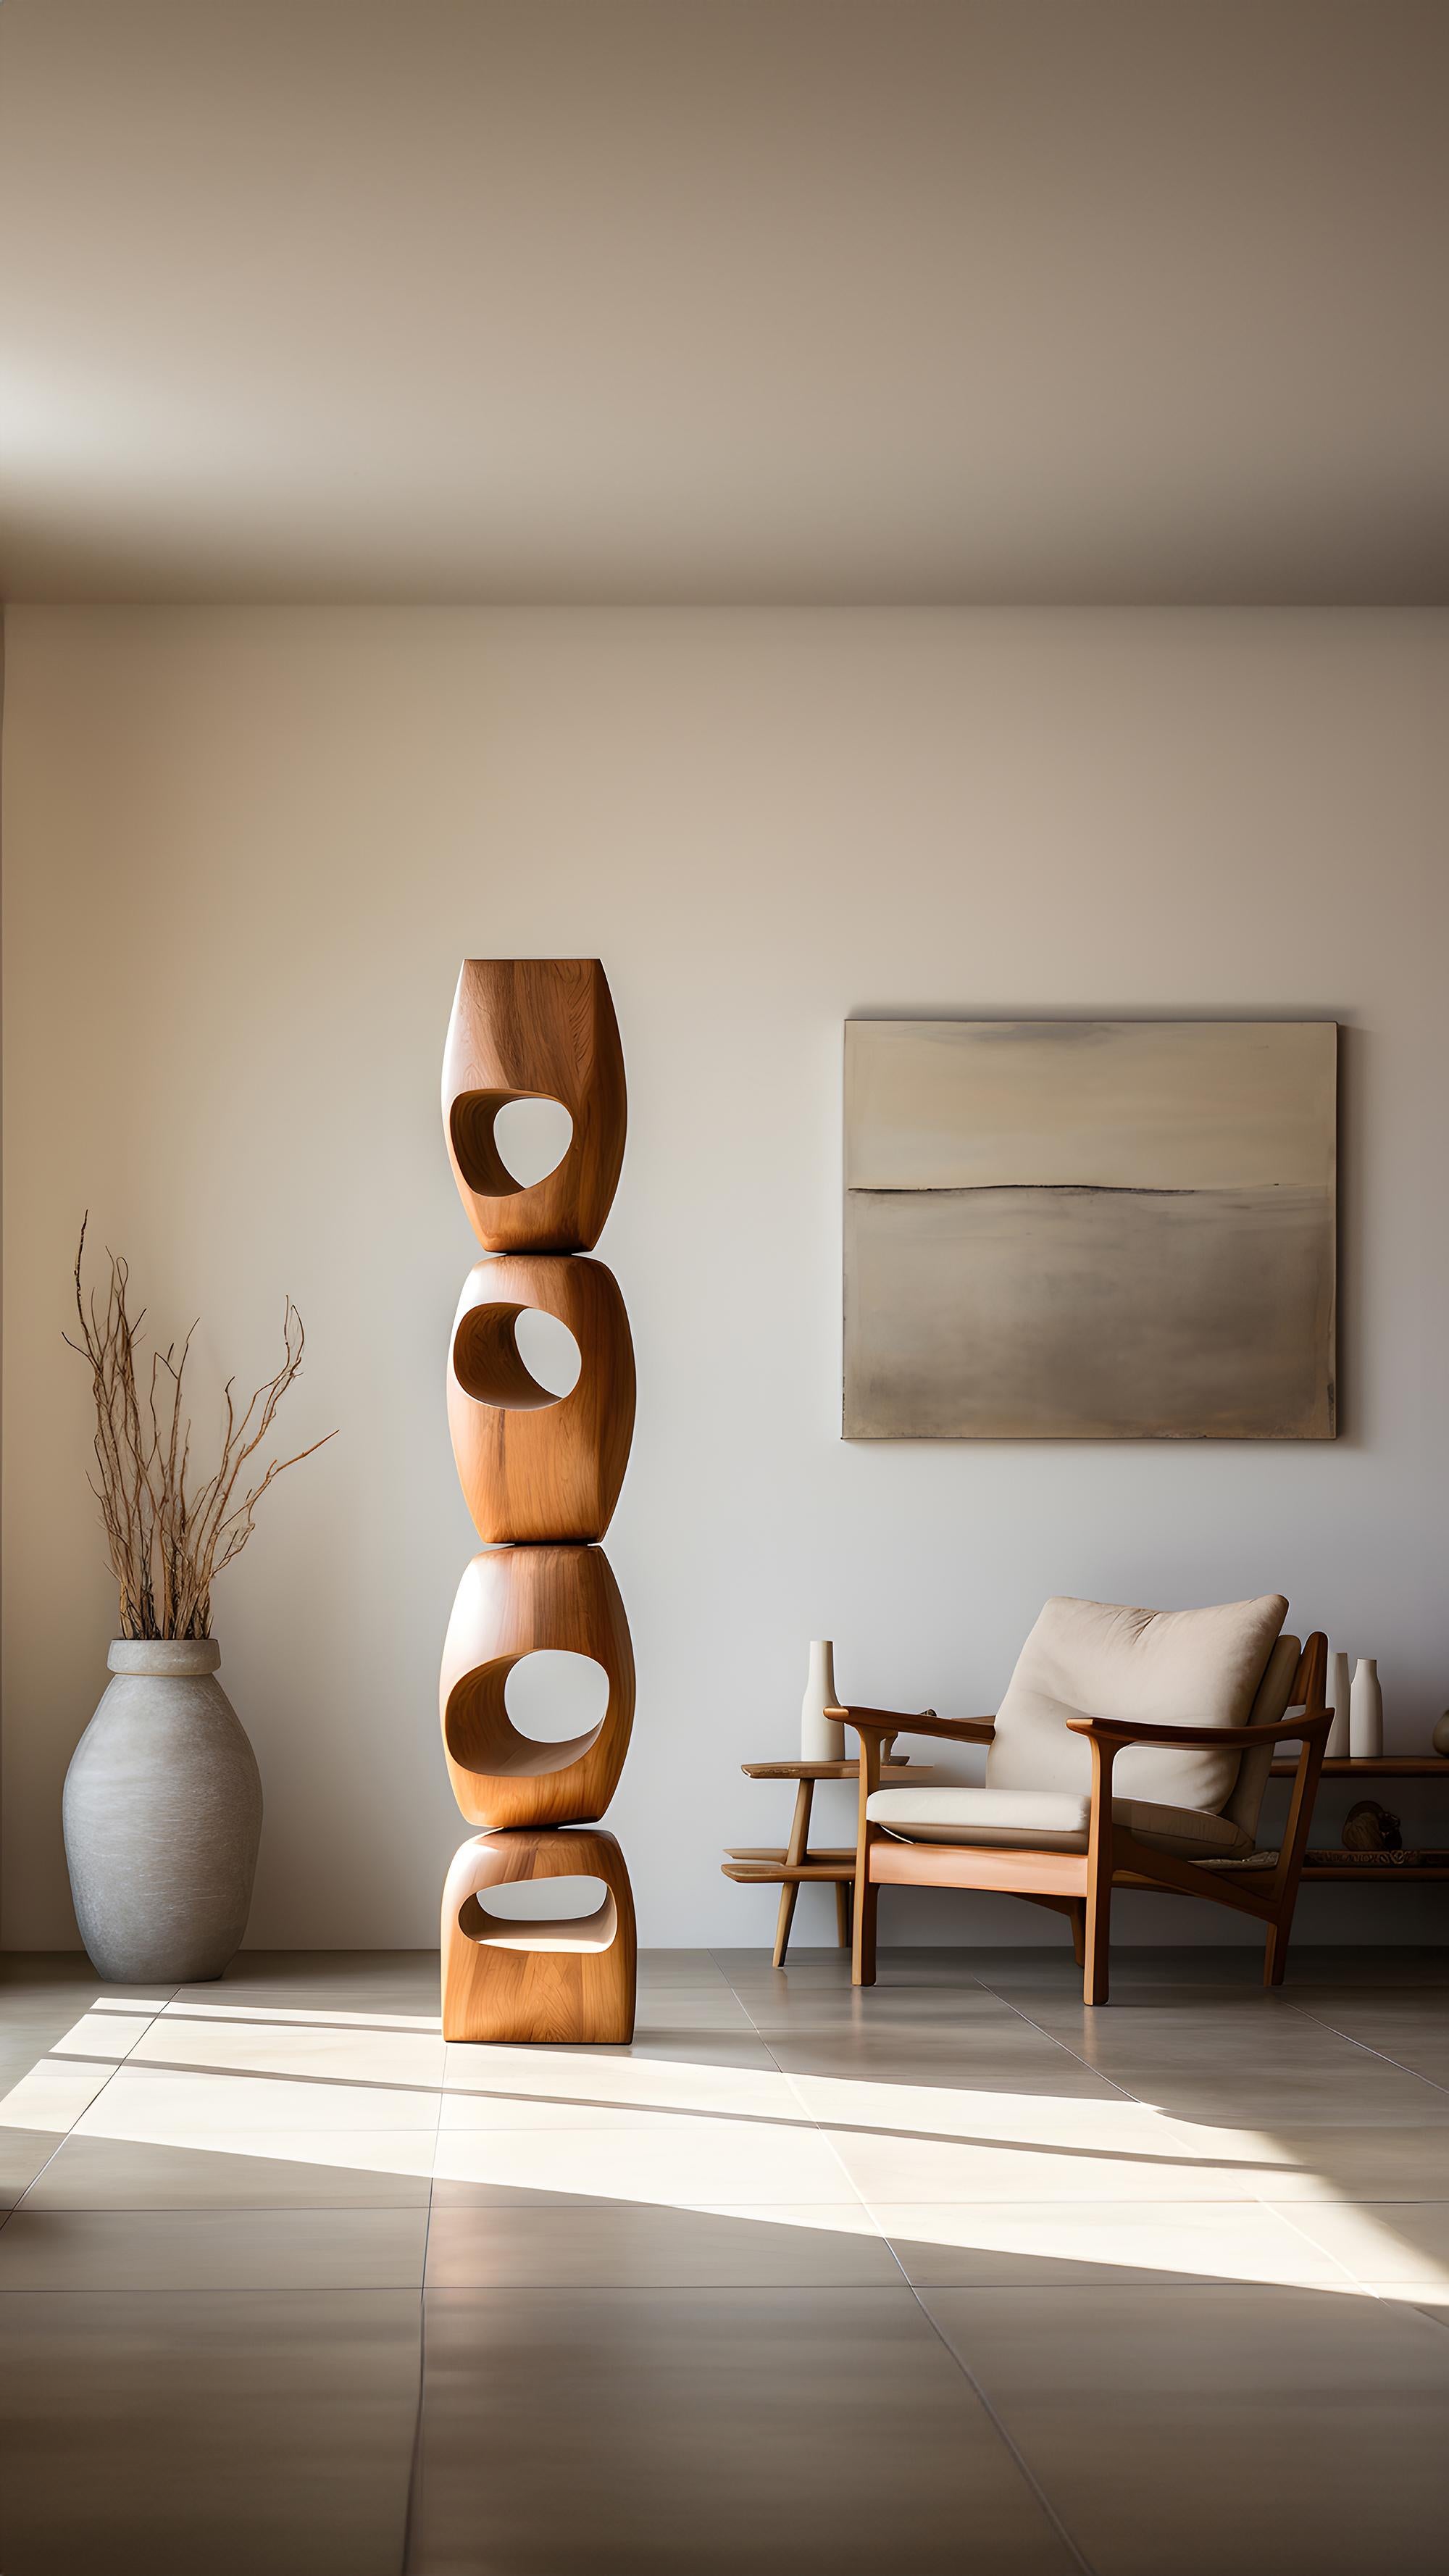 Mexican Still Stand No56: Abstract Wooden Grace by NONO, Modern Escalona Sculpture For Sale